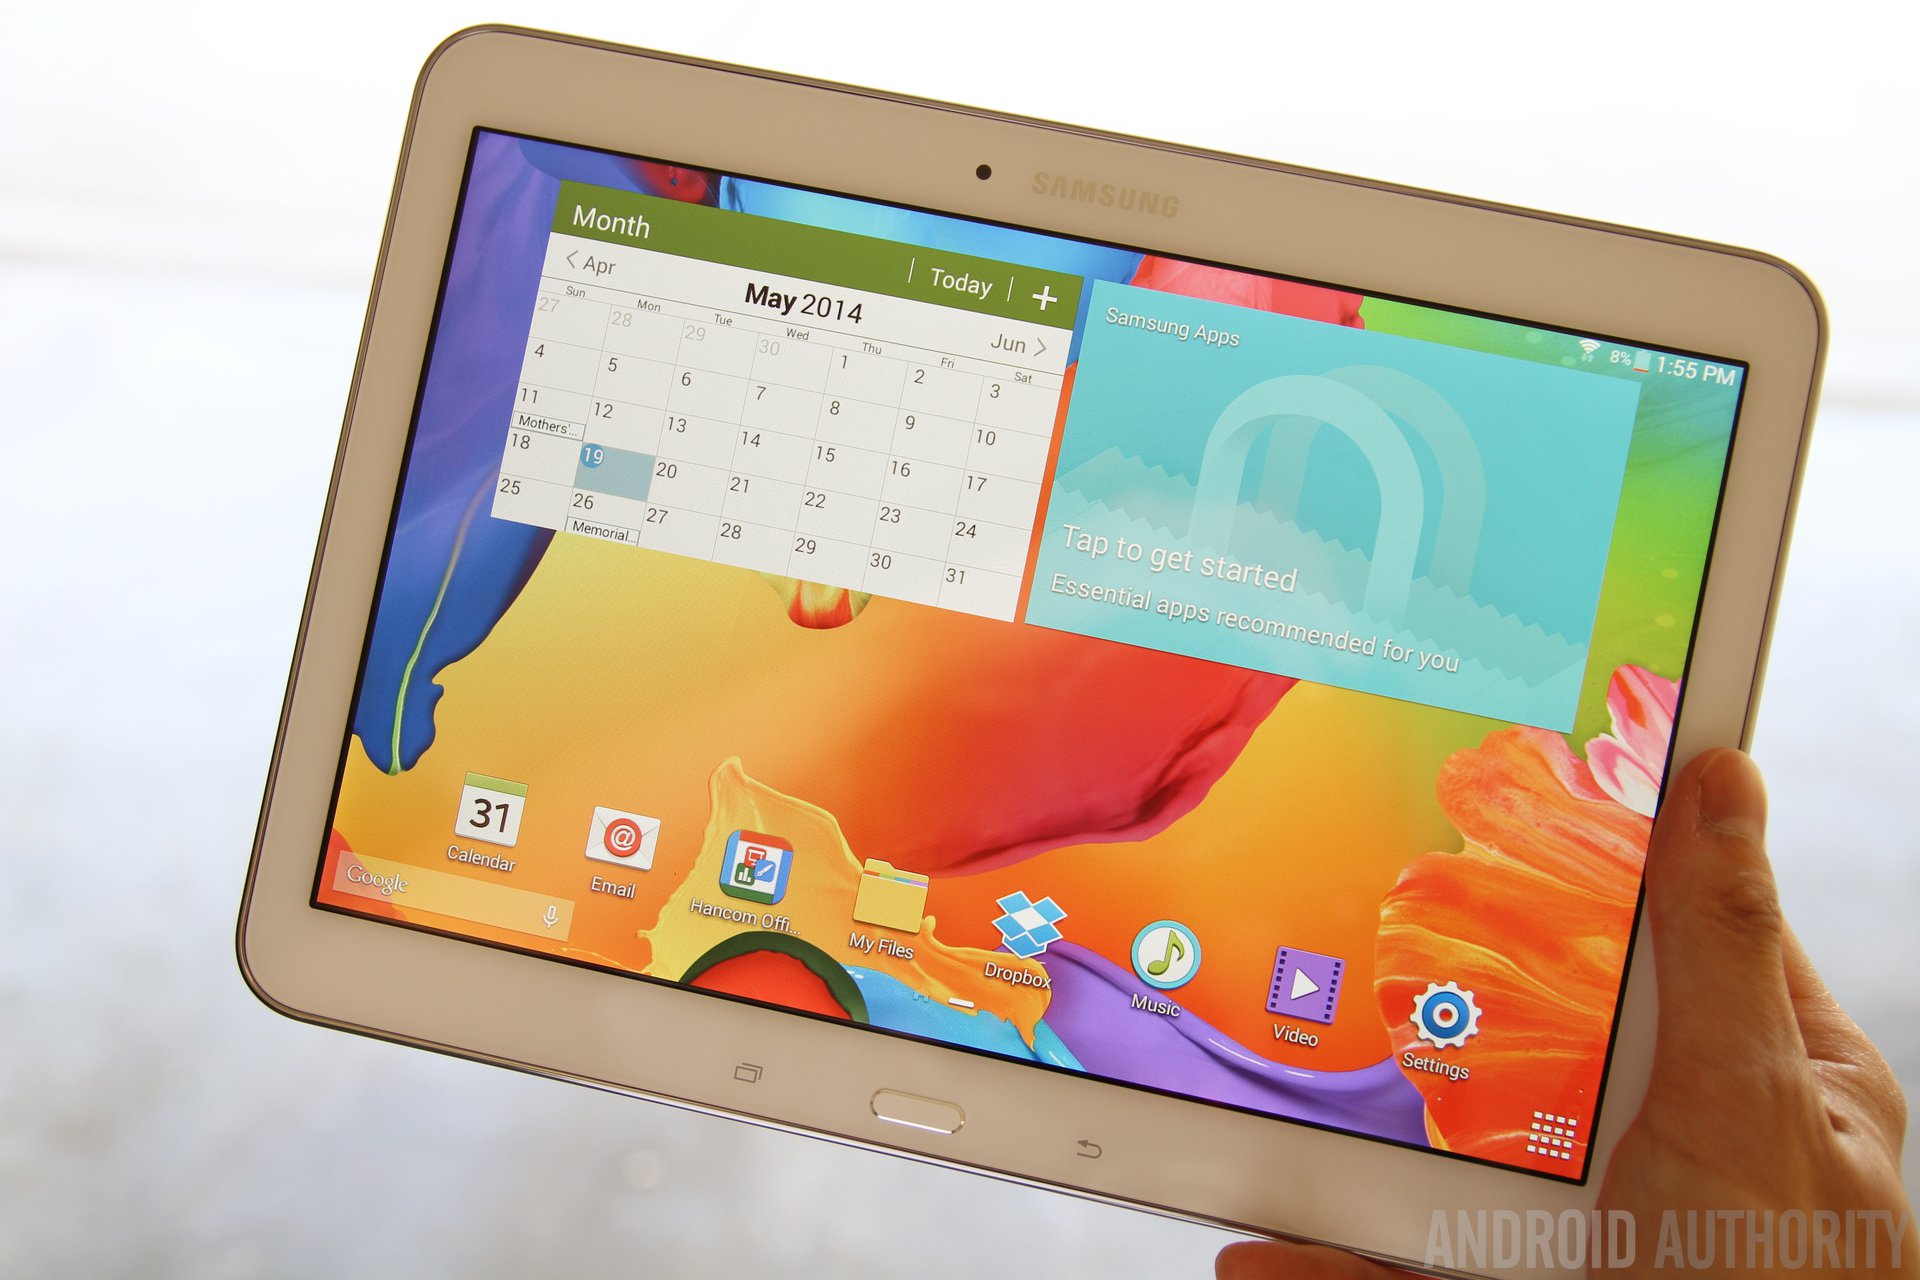 updating Galaxy Tab 4 10.1-inch with Android - Android Authority